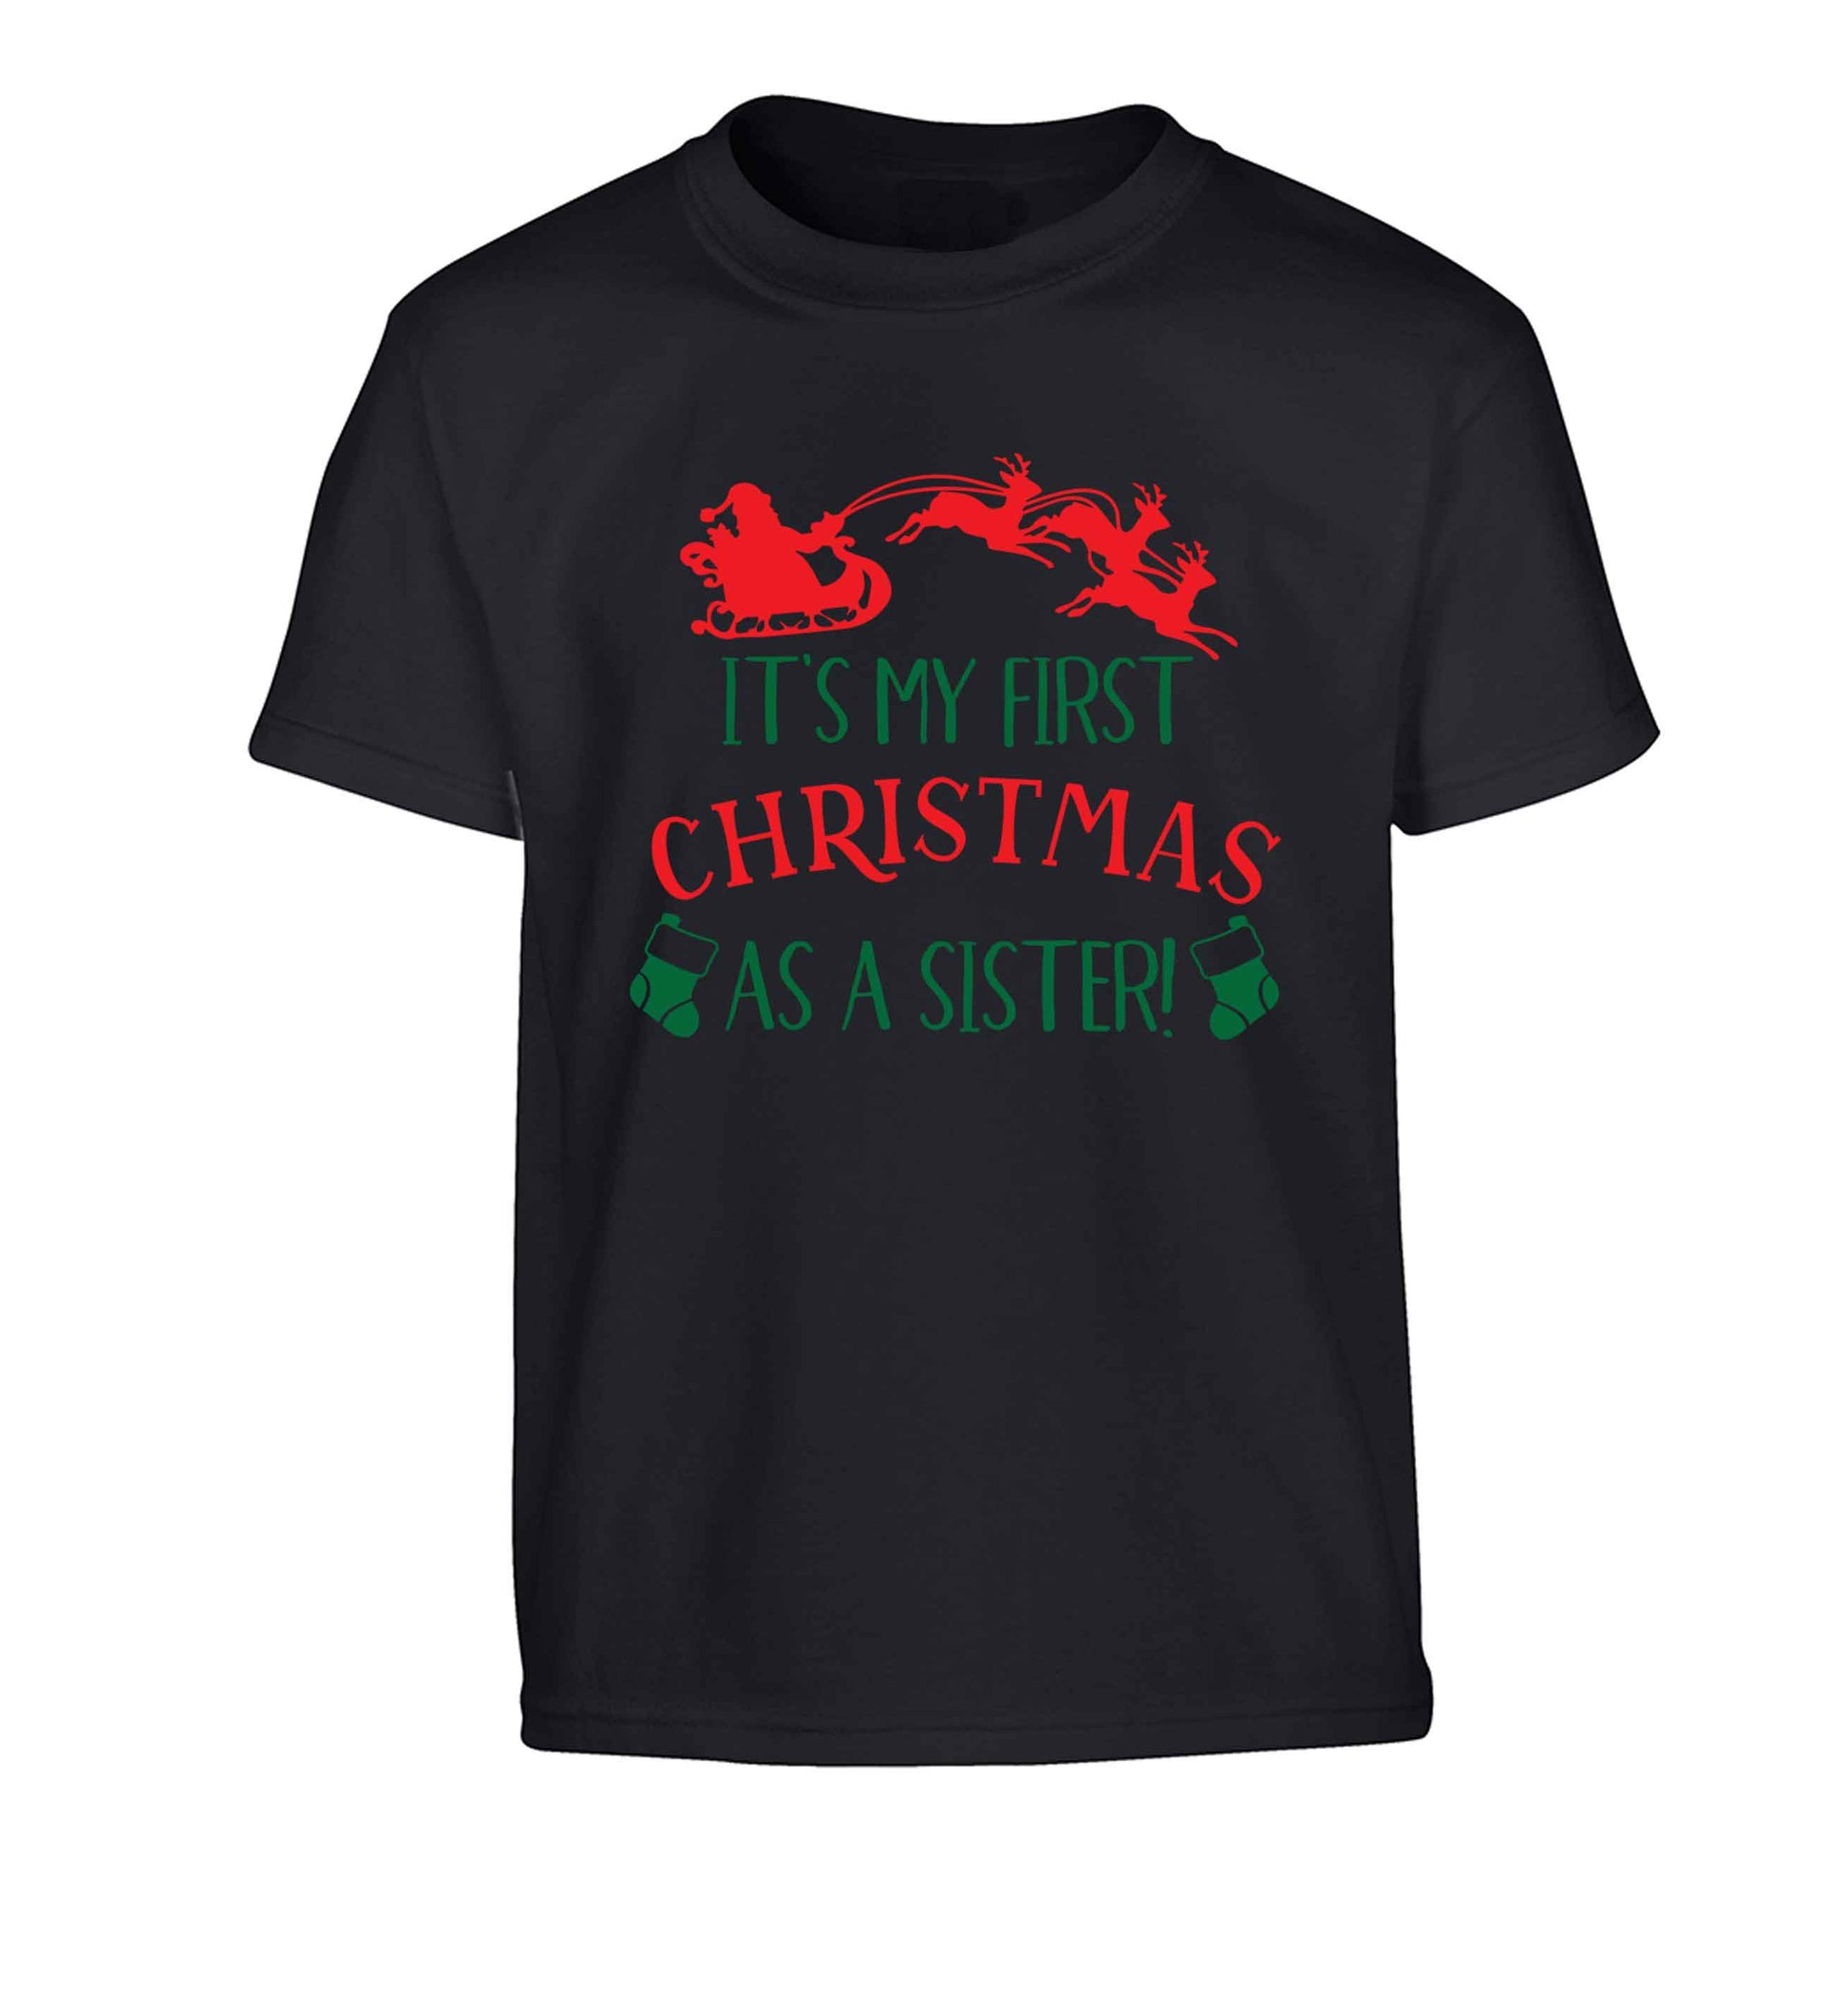 It's my first Christmas as a sister! Children's black Tshirt 12-13 Years